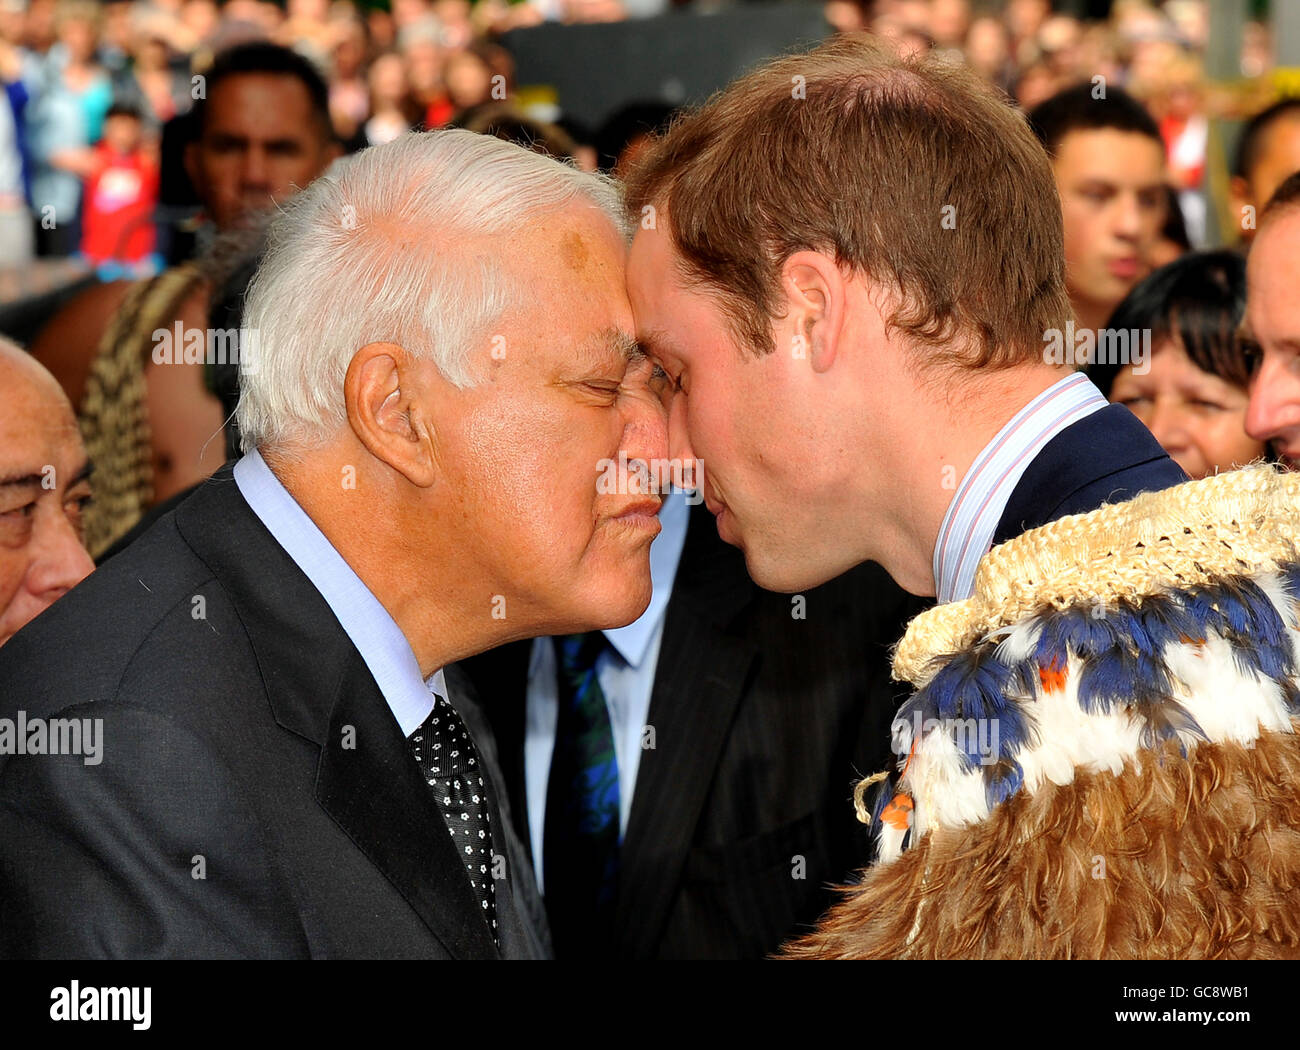 Royalty - Prince William - New Zealand - Day Two Stock Photo